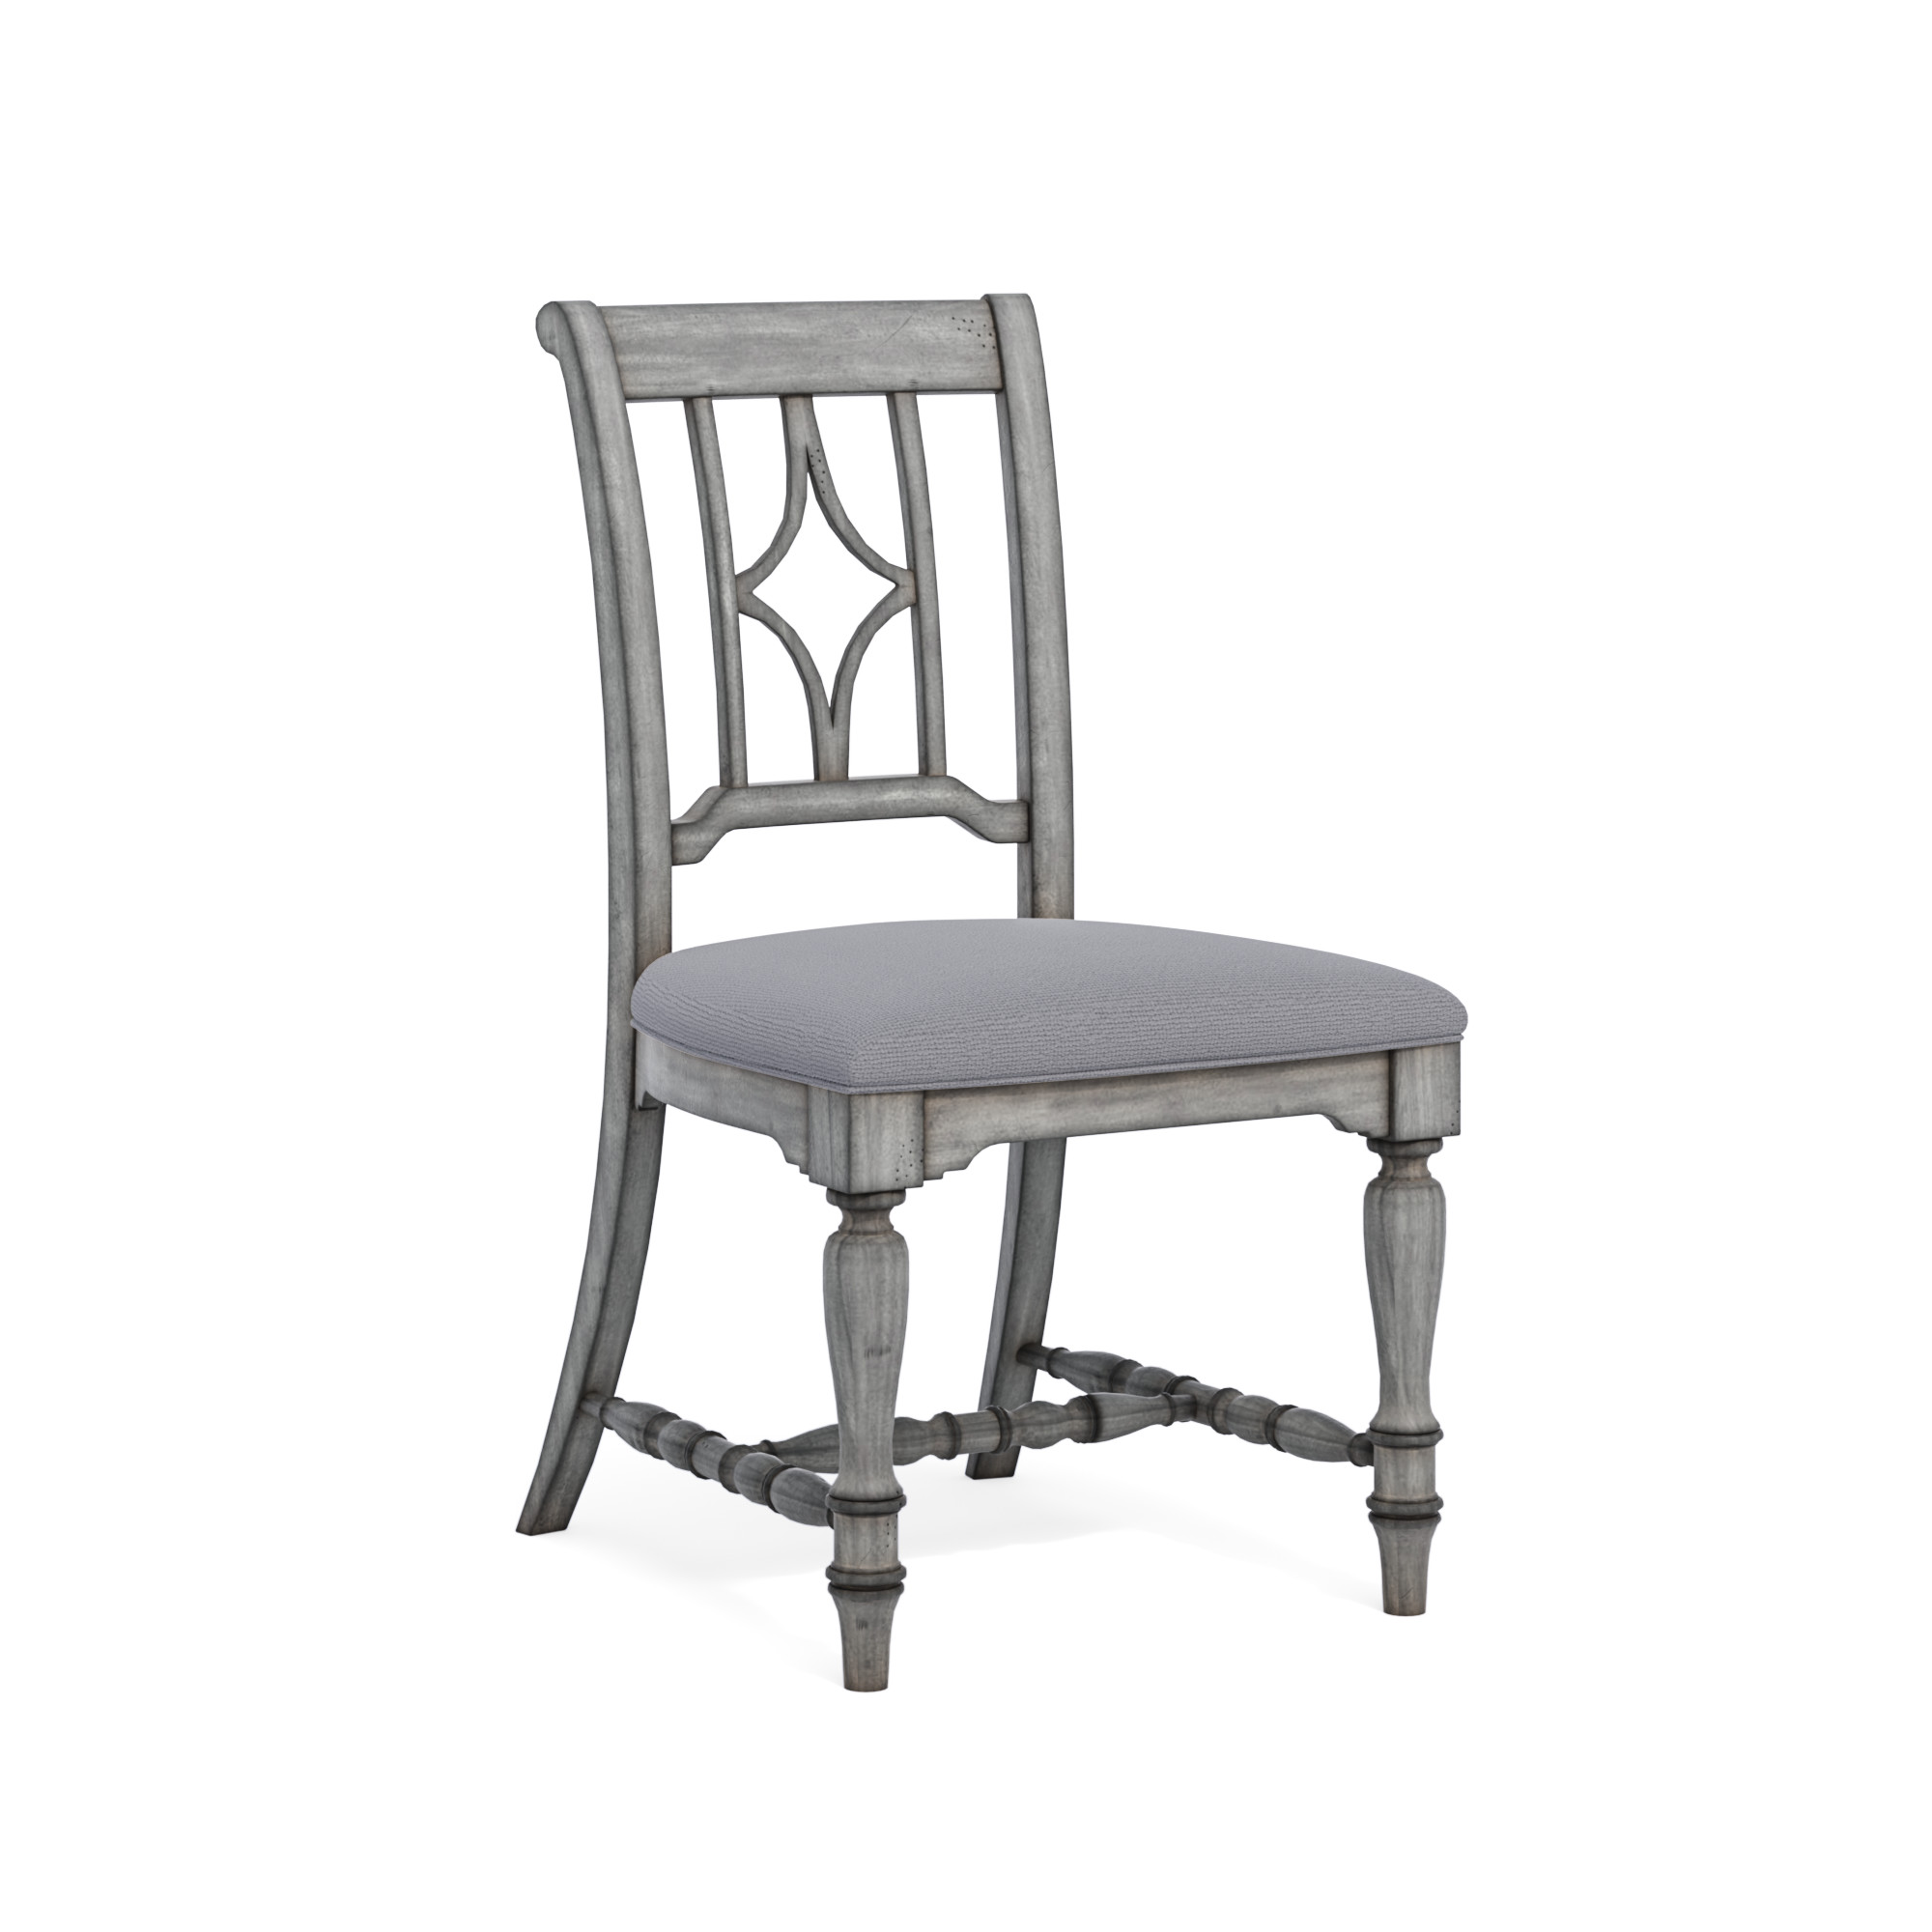 Flexsteel Plymouth Upholstered Dining Chair